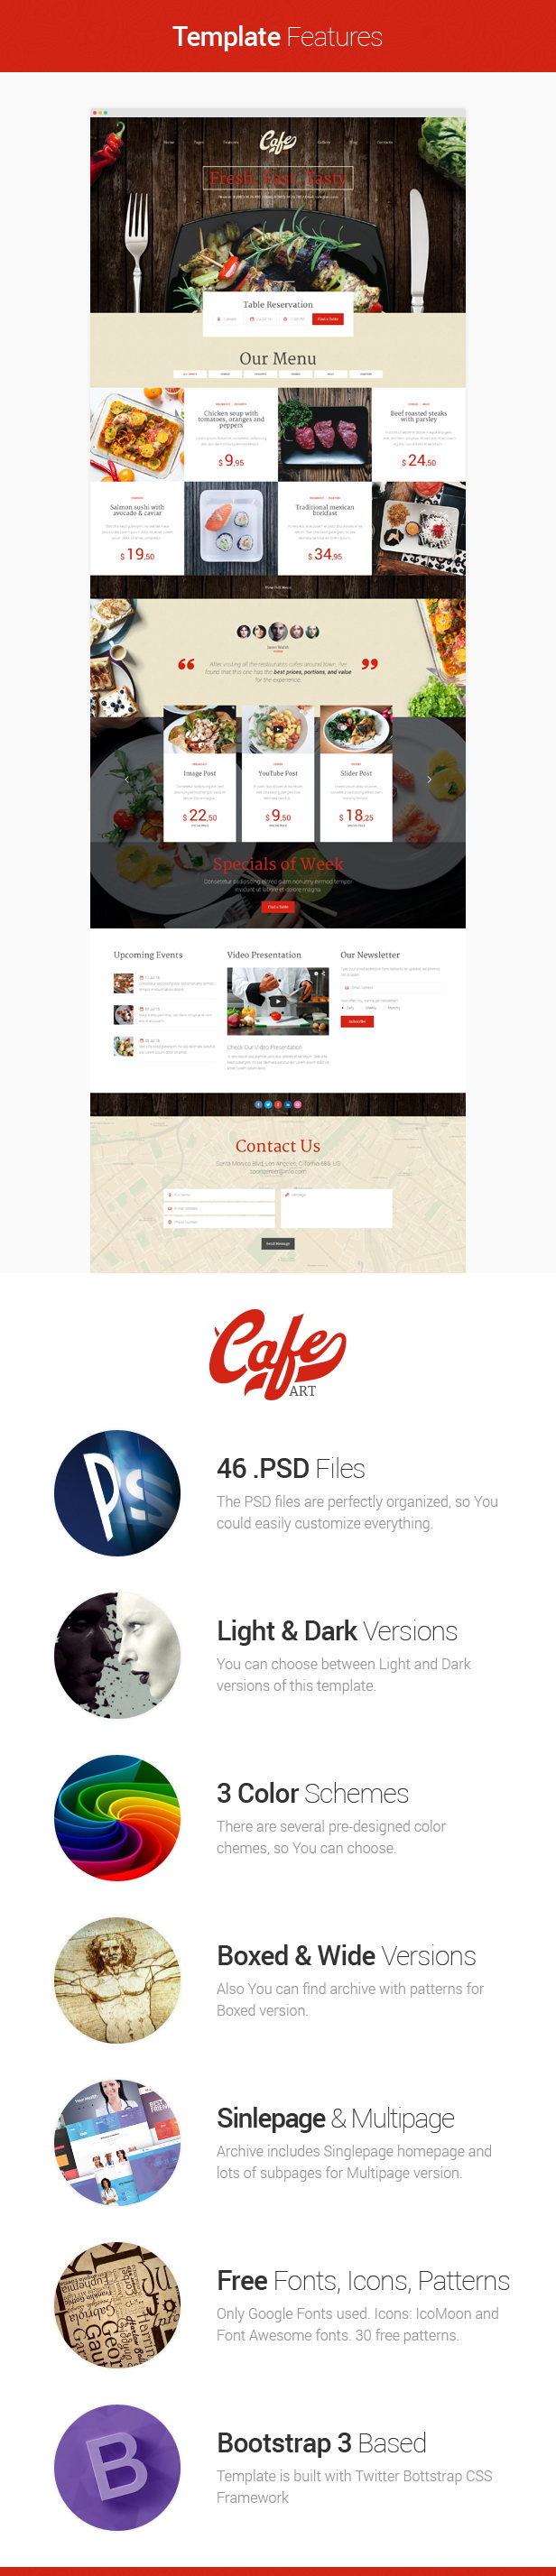 Cafe Art - Cafe and Restaurant PSD template